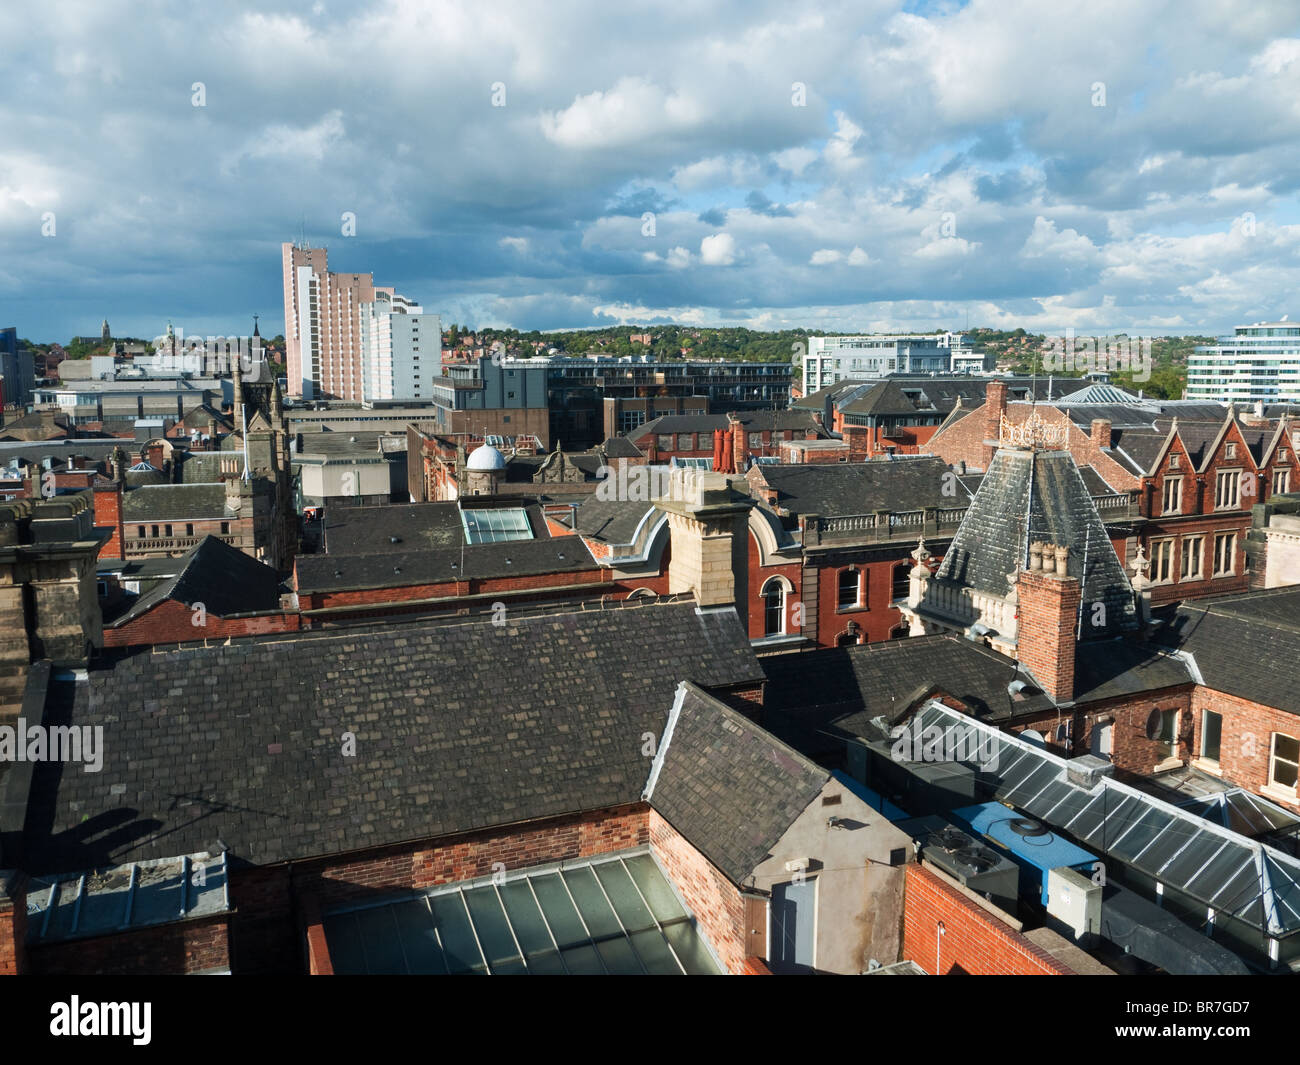 A view across the rooftops of Nottingham city centre, taken from the fifth floor of the Ibis hotel. Stock Photo